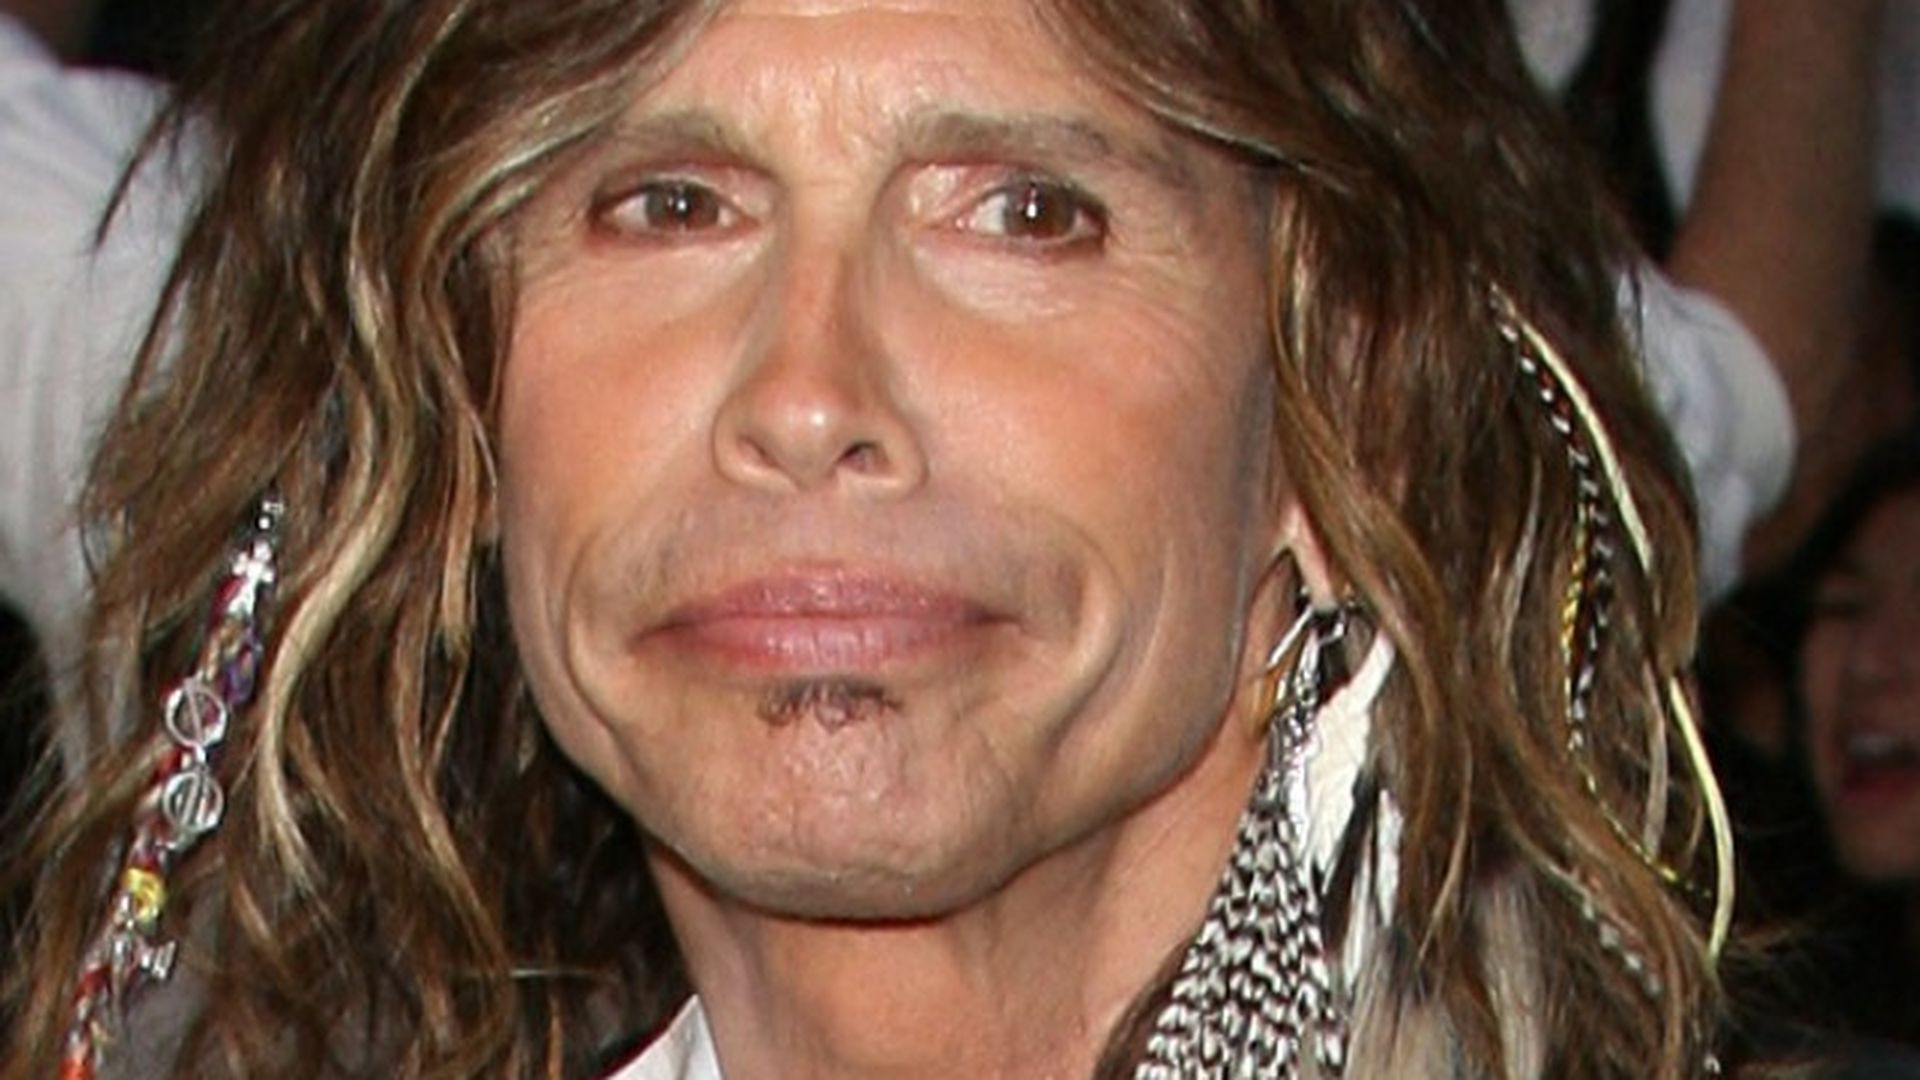 Steven Tyler Wallpaper High Resolution And Quality